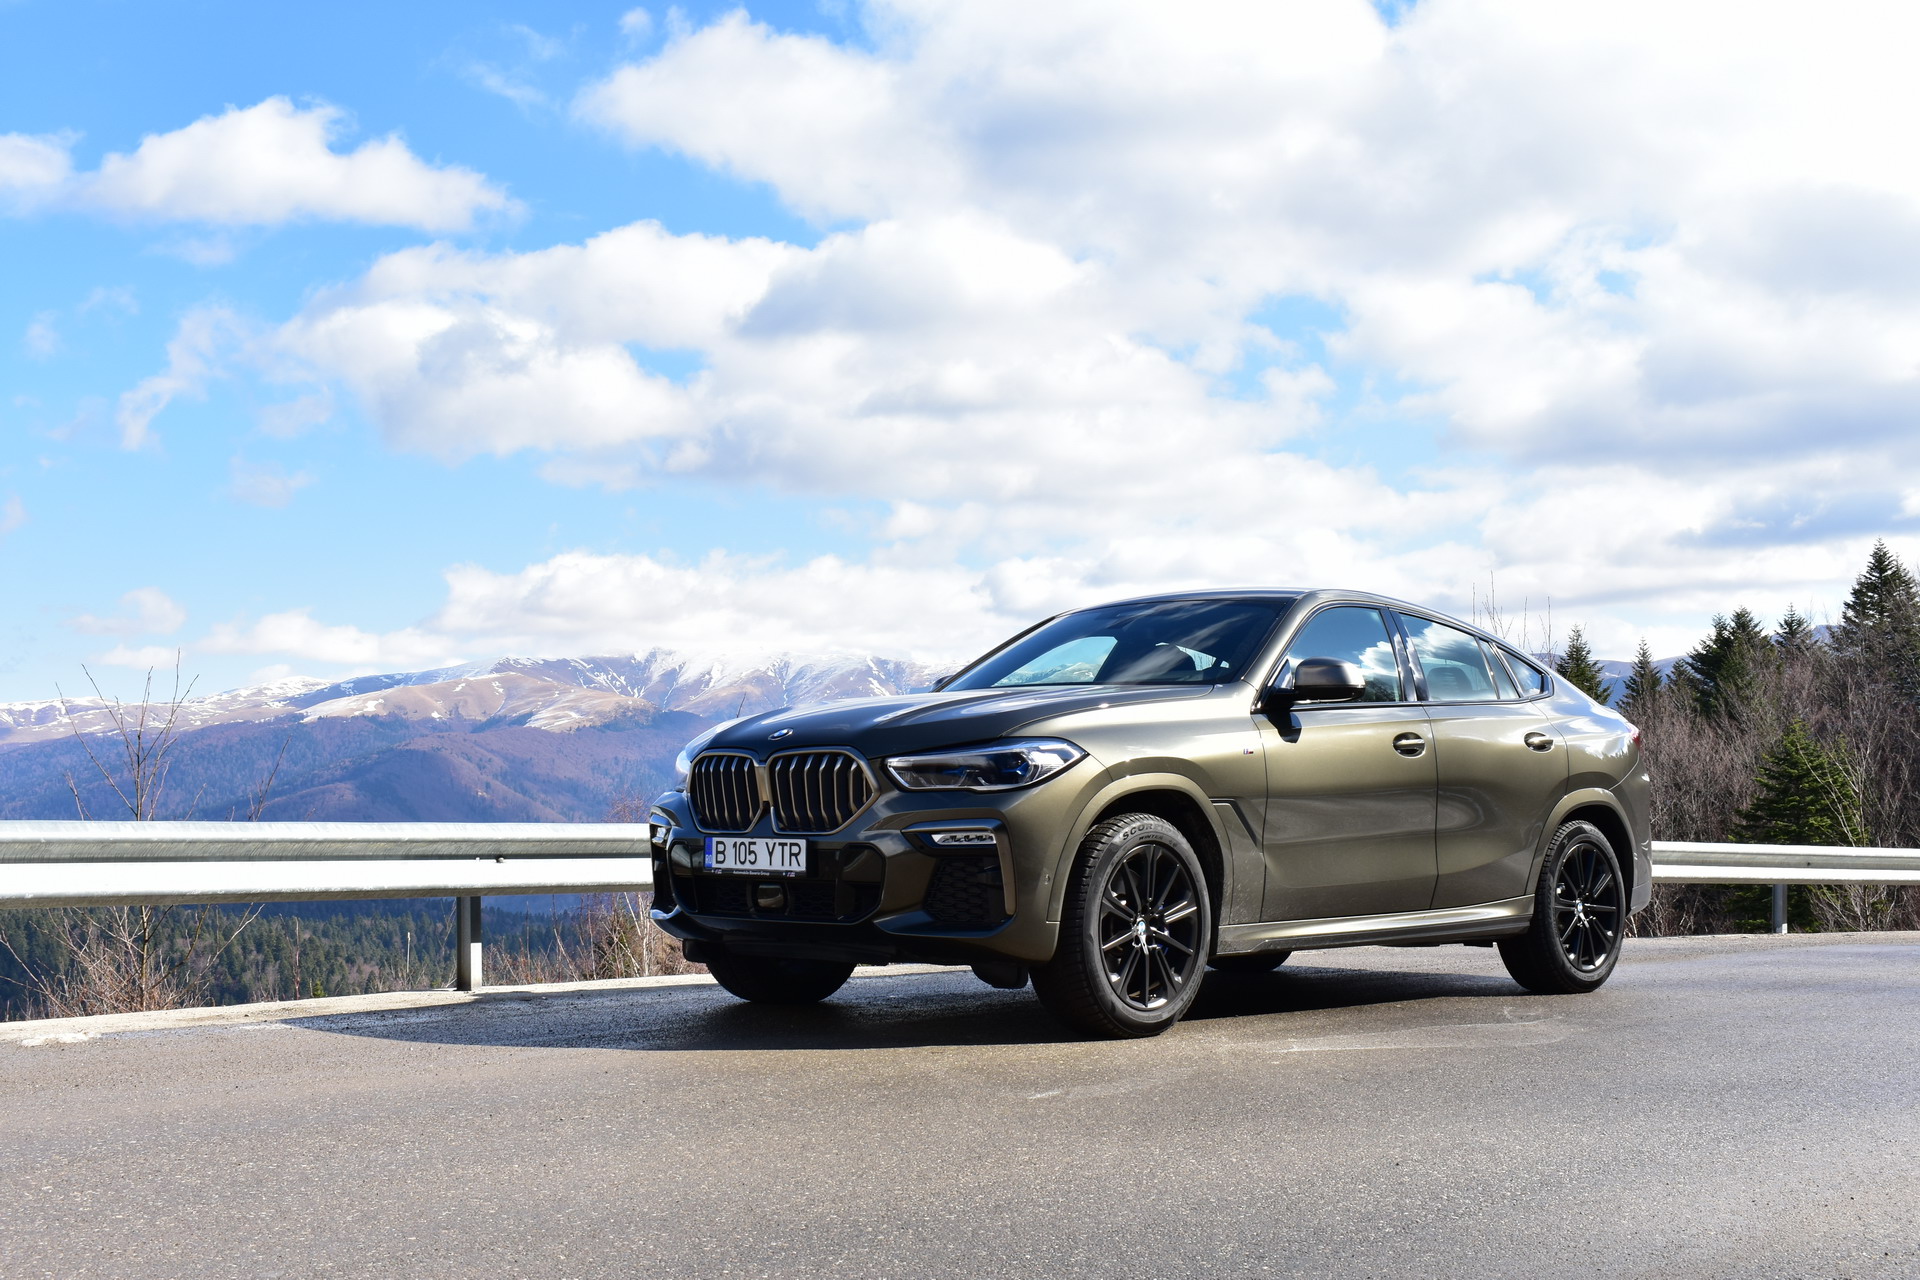 TEST DRIVE: 2020 BMW X6 M50d - Aggressive, Effortless, Compelling